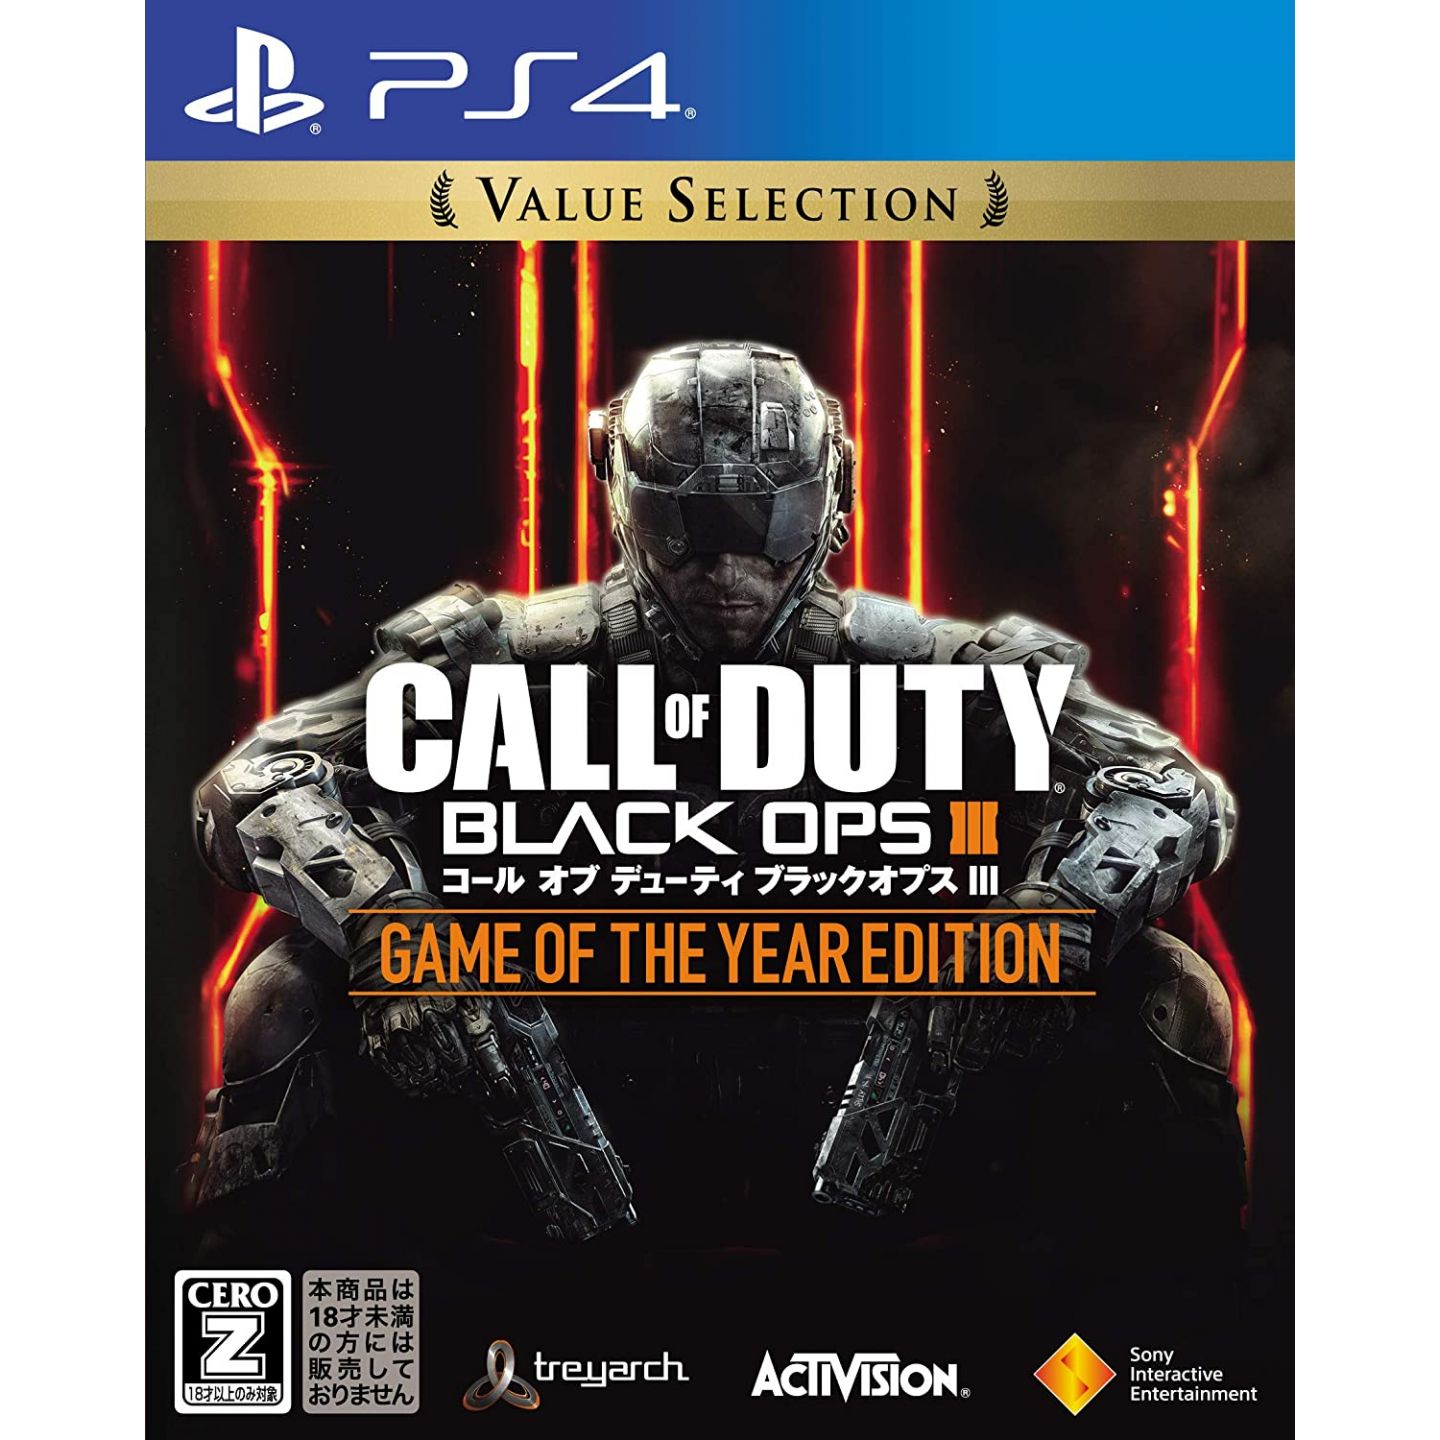 Call of duty Black OPS III GAME the YEAR Edition Selection SONY PS4 PLAYSTATION 4